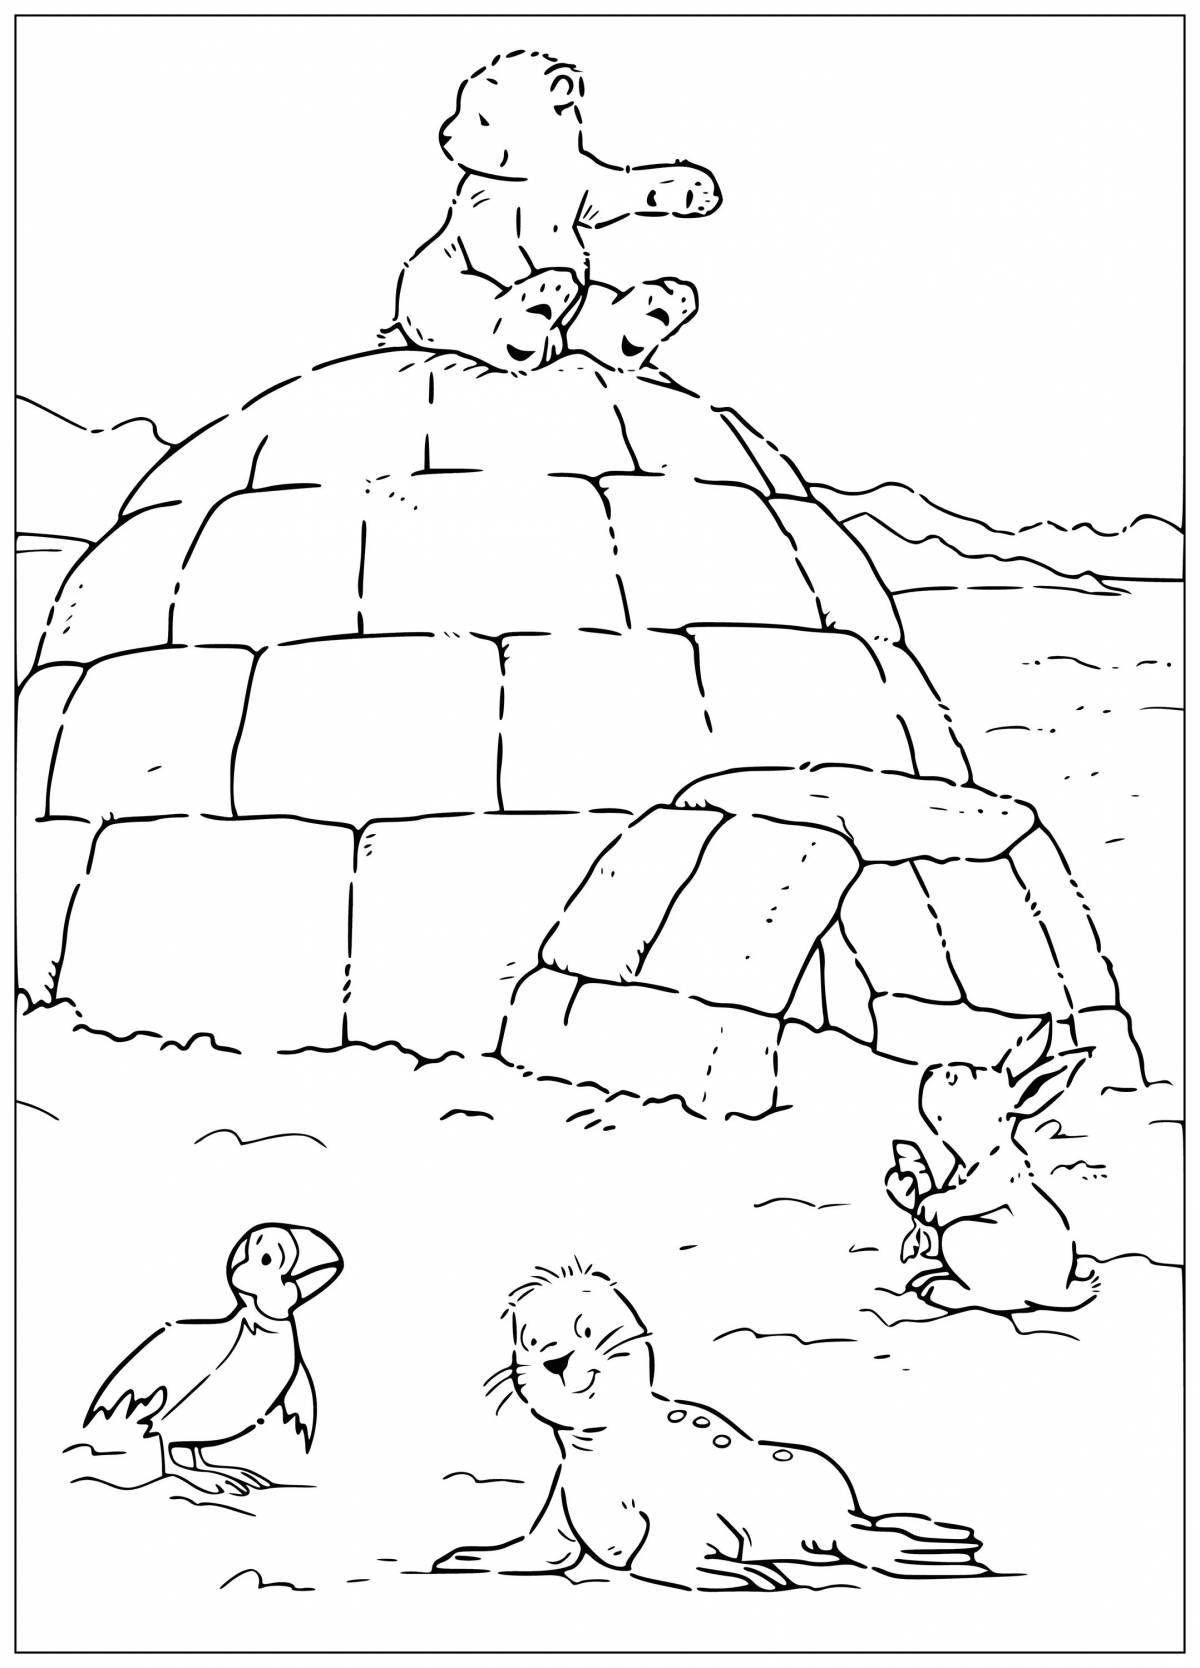 Animated north pole coloring page